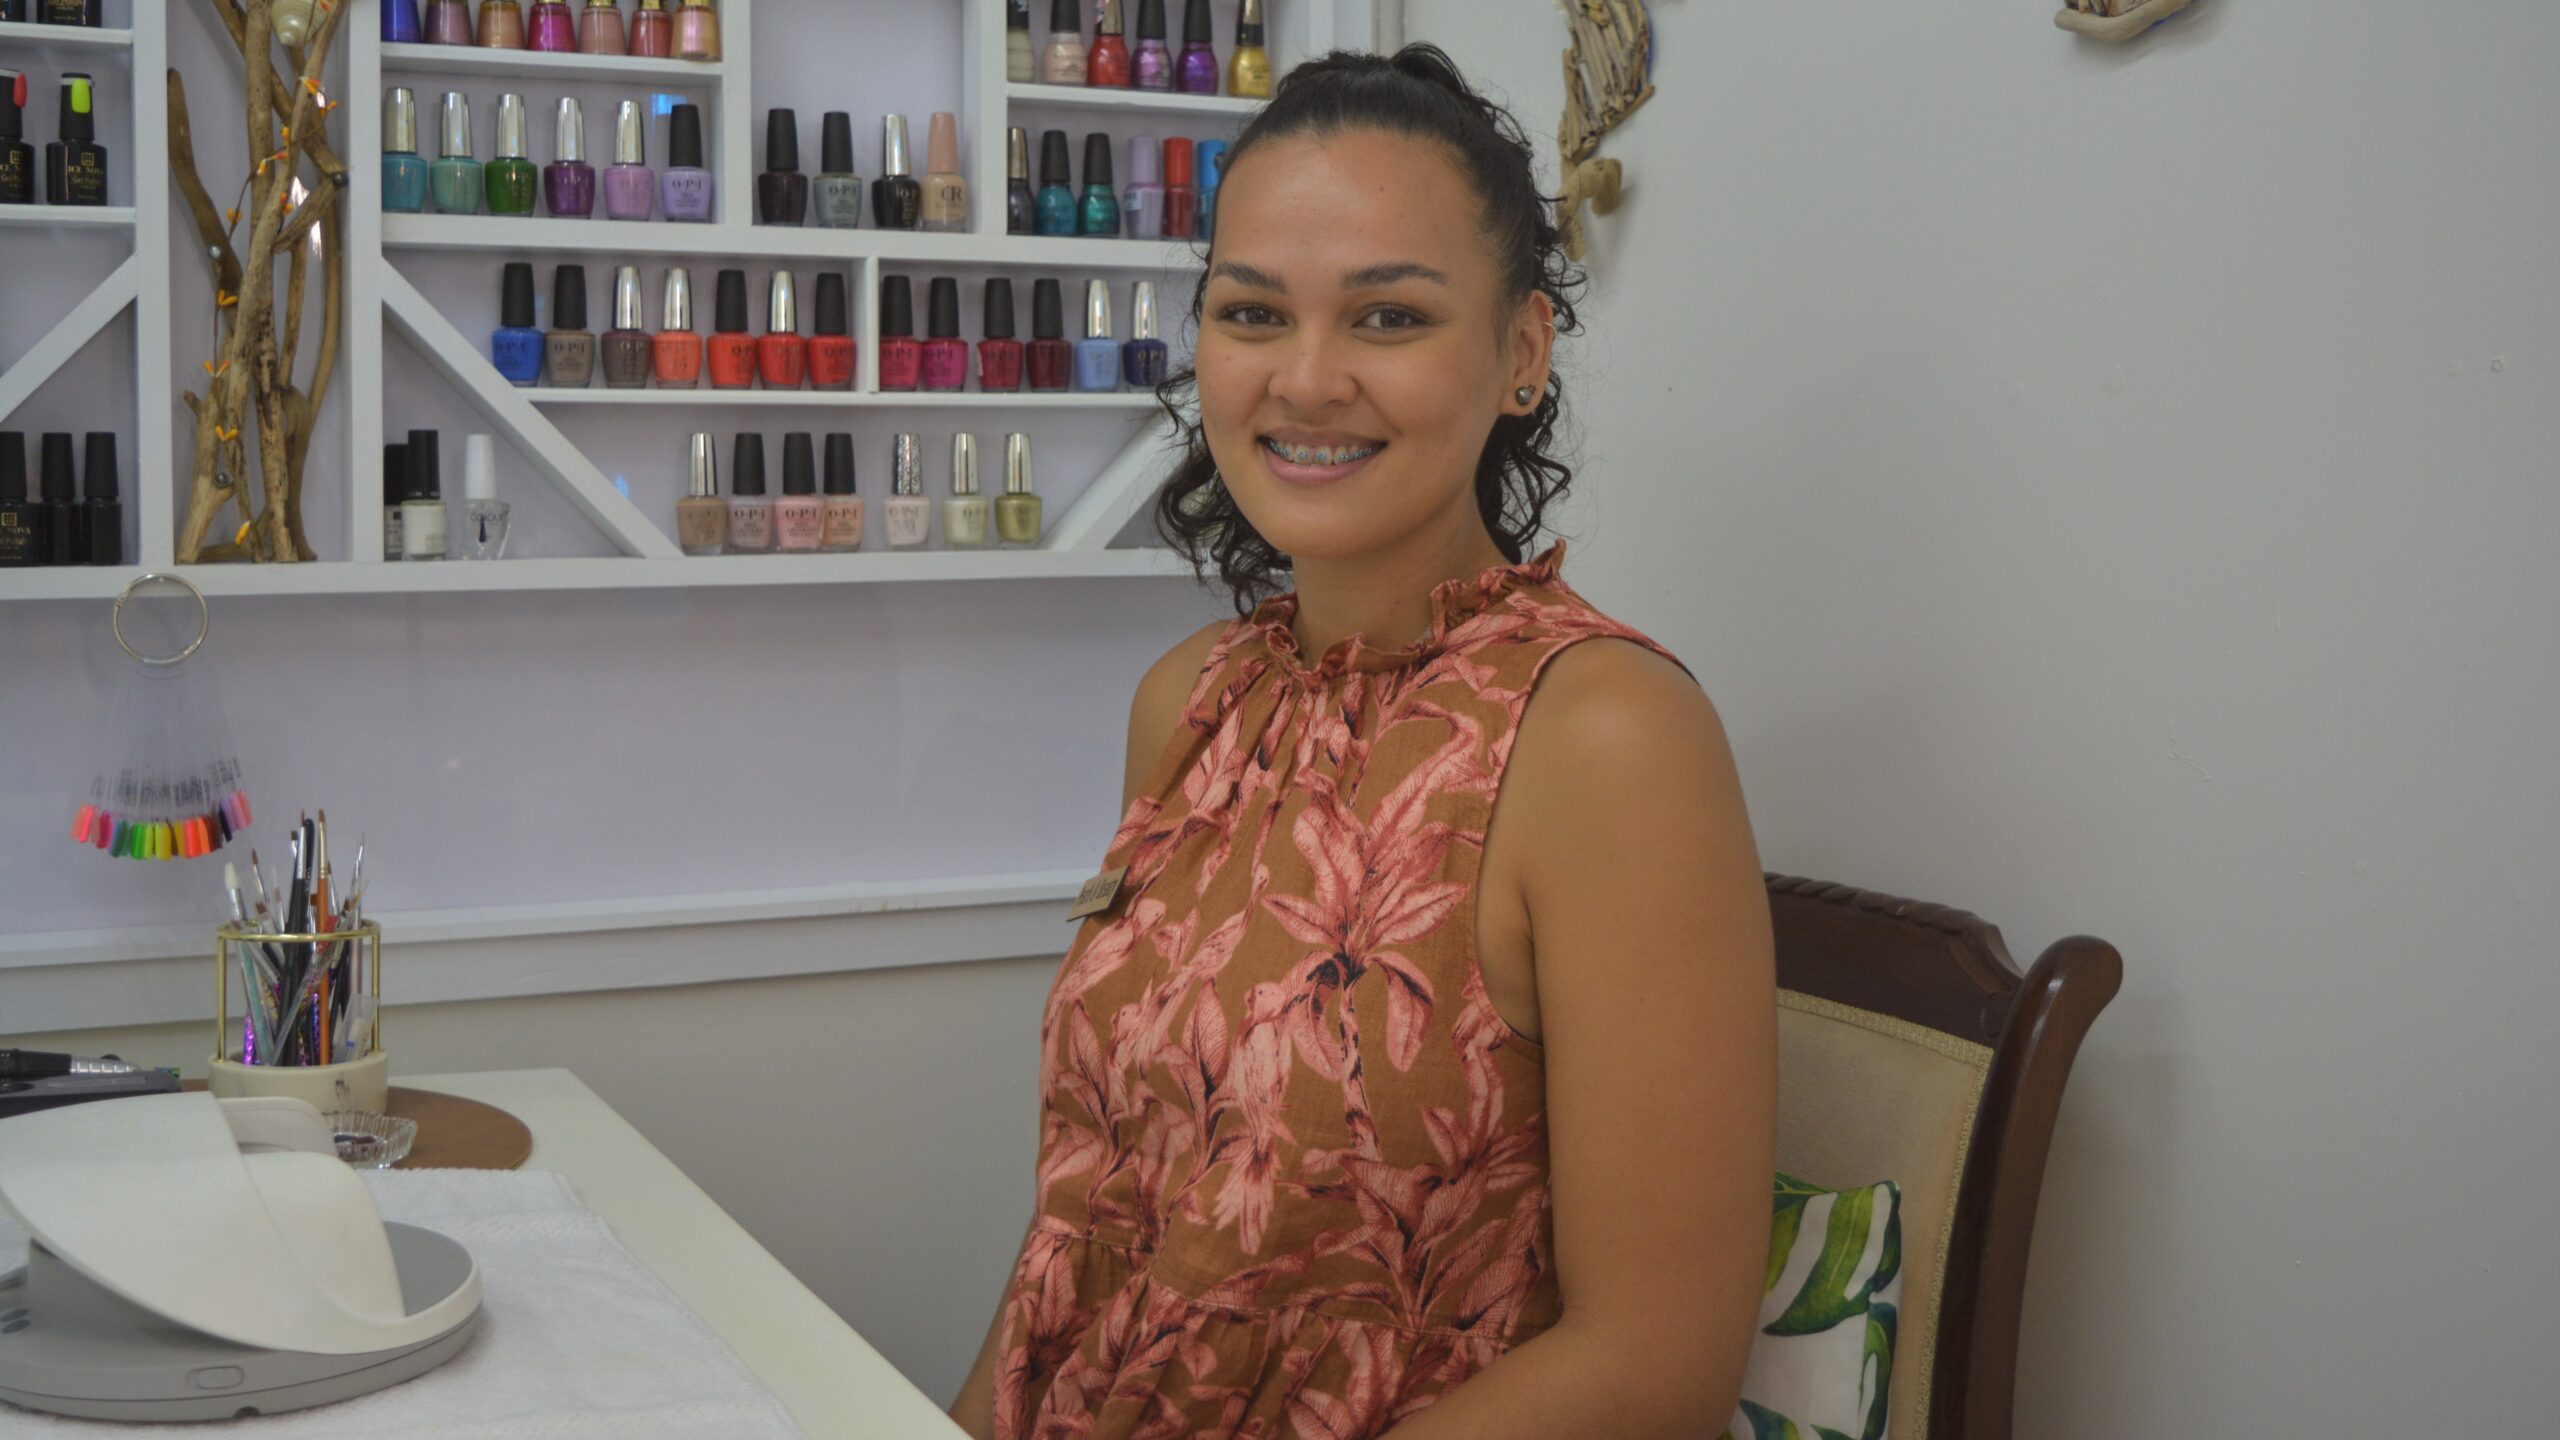 Meyer’s passion for beauty brings her back to Raro